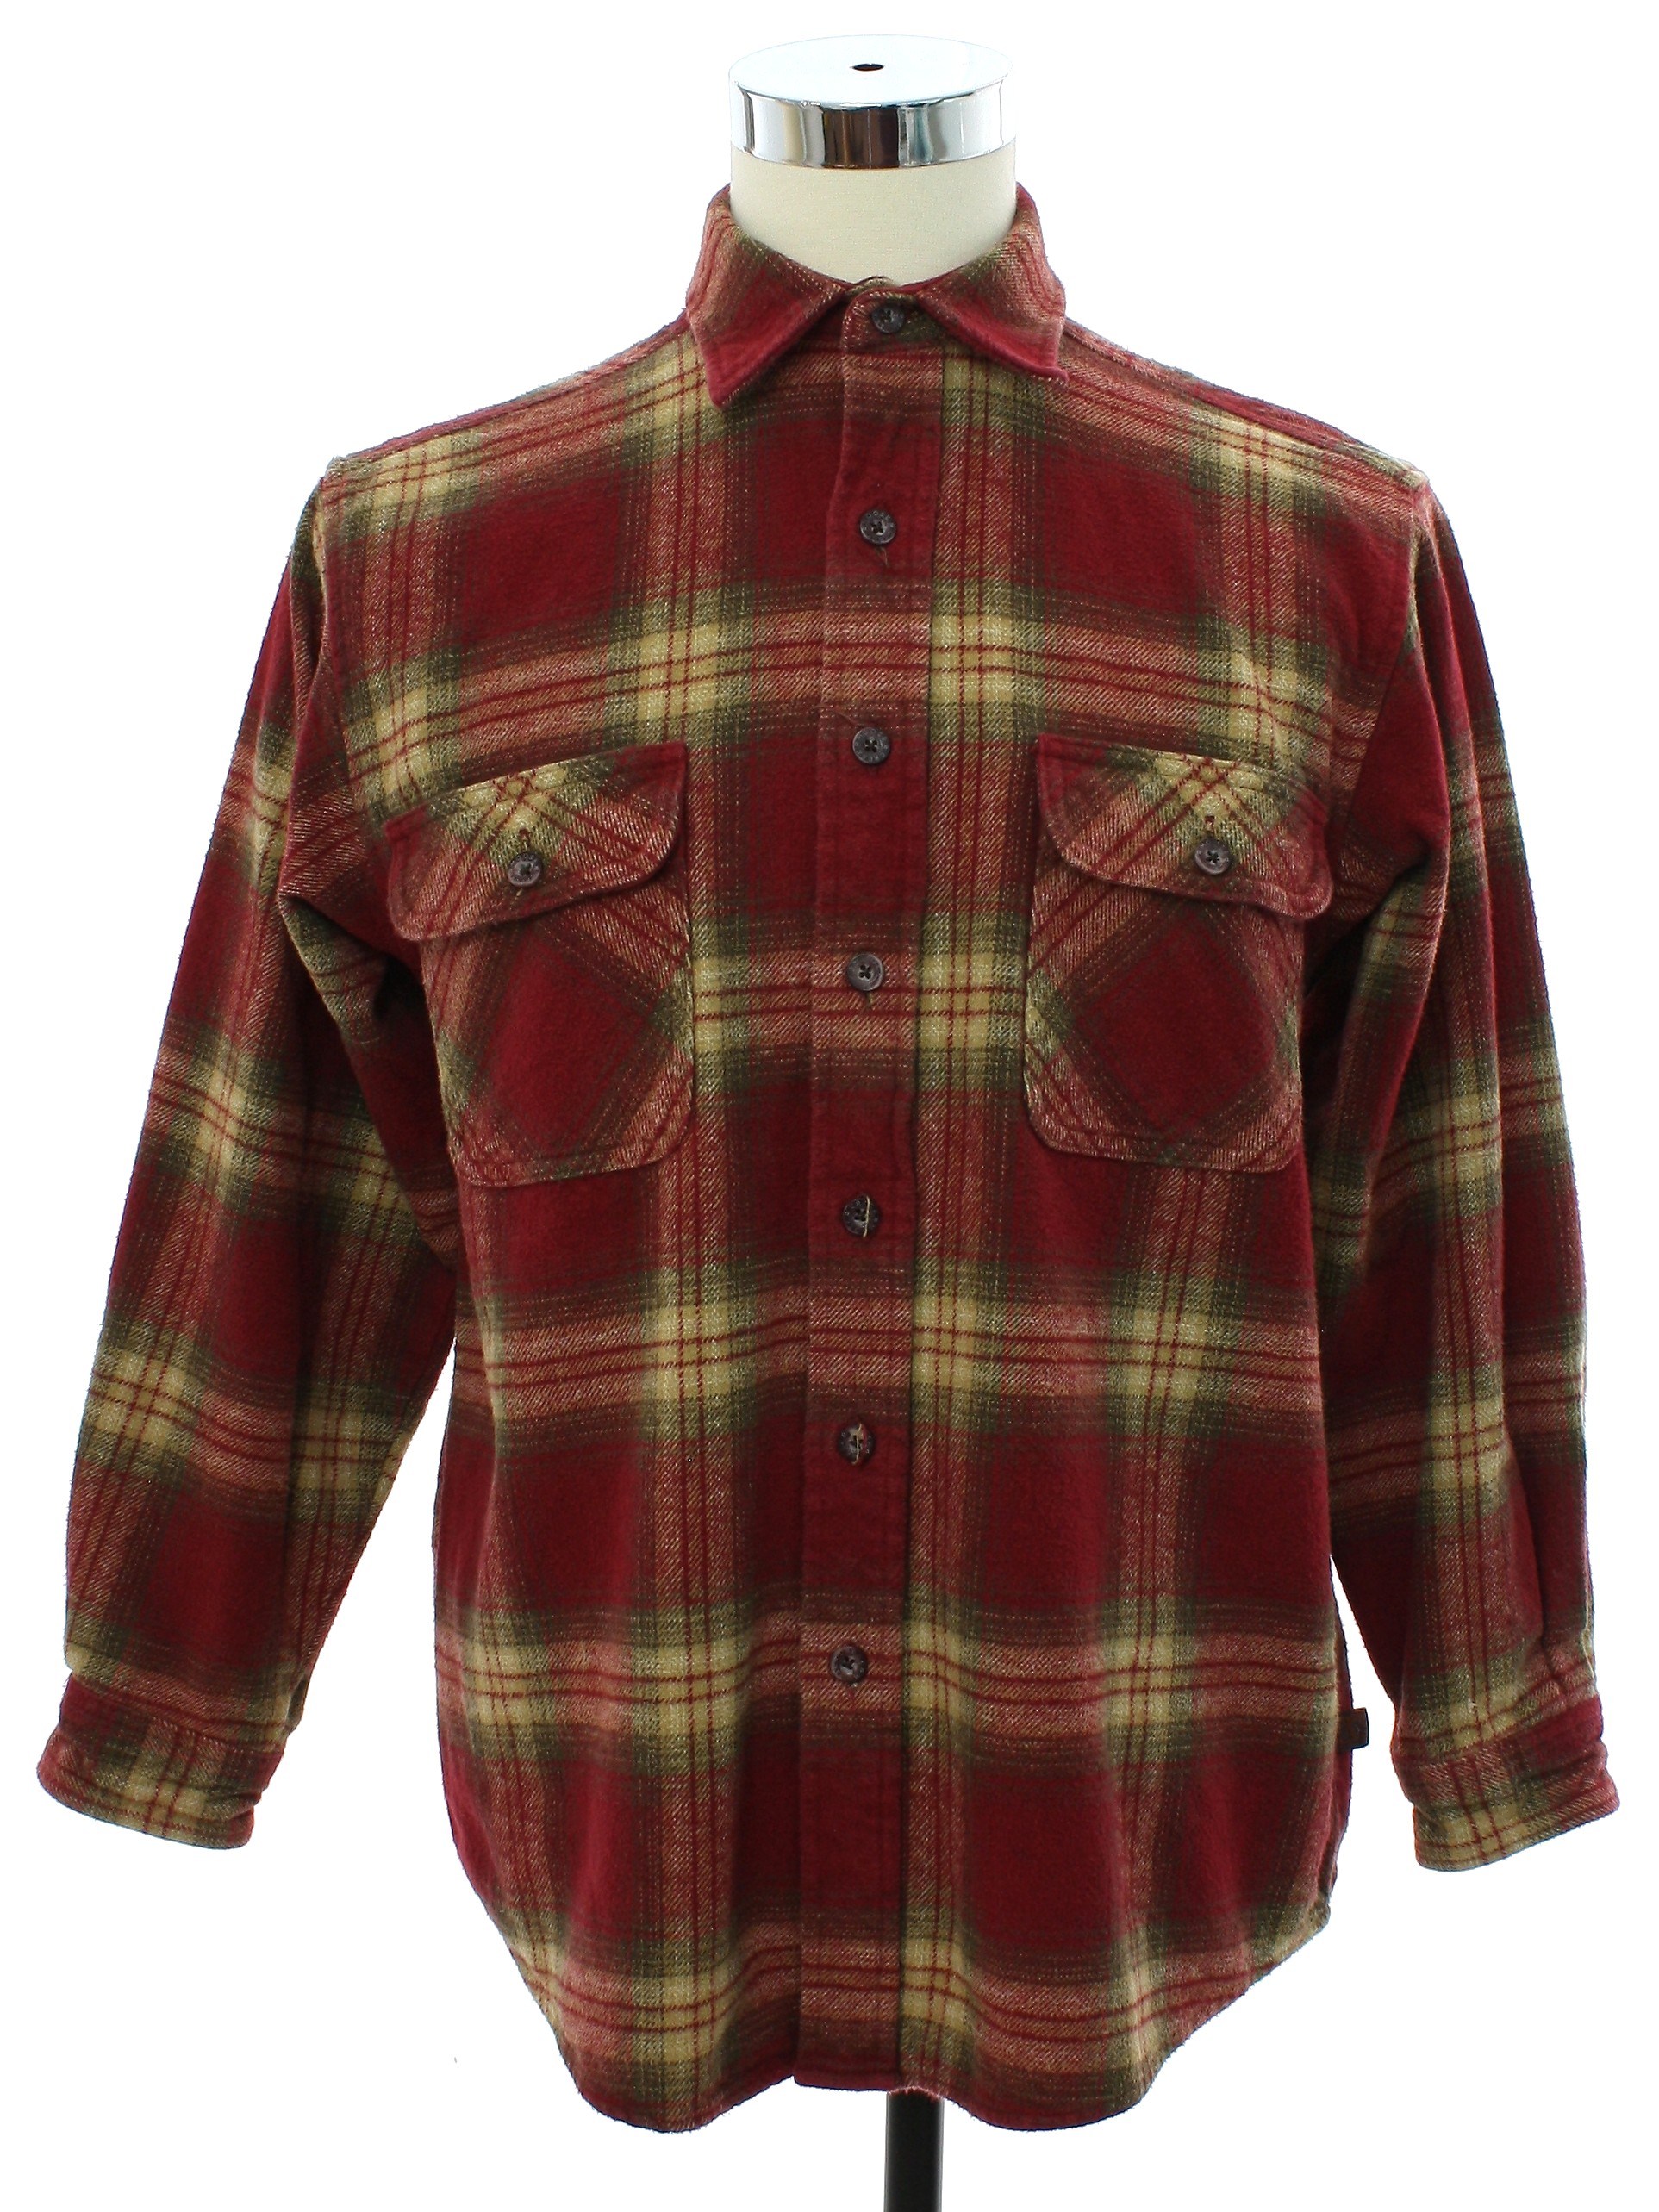 Shirt: 90s -Moose Creek- Mens red, brown, and tan plaid heavy cotton ...